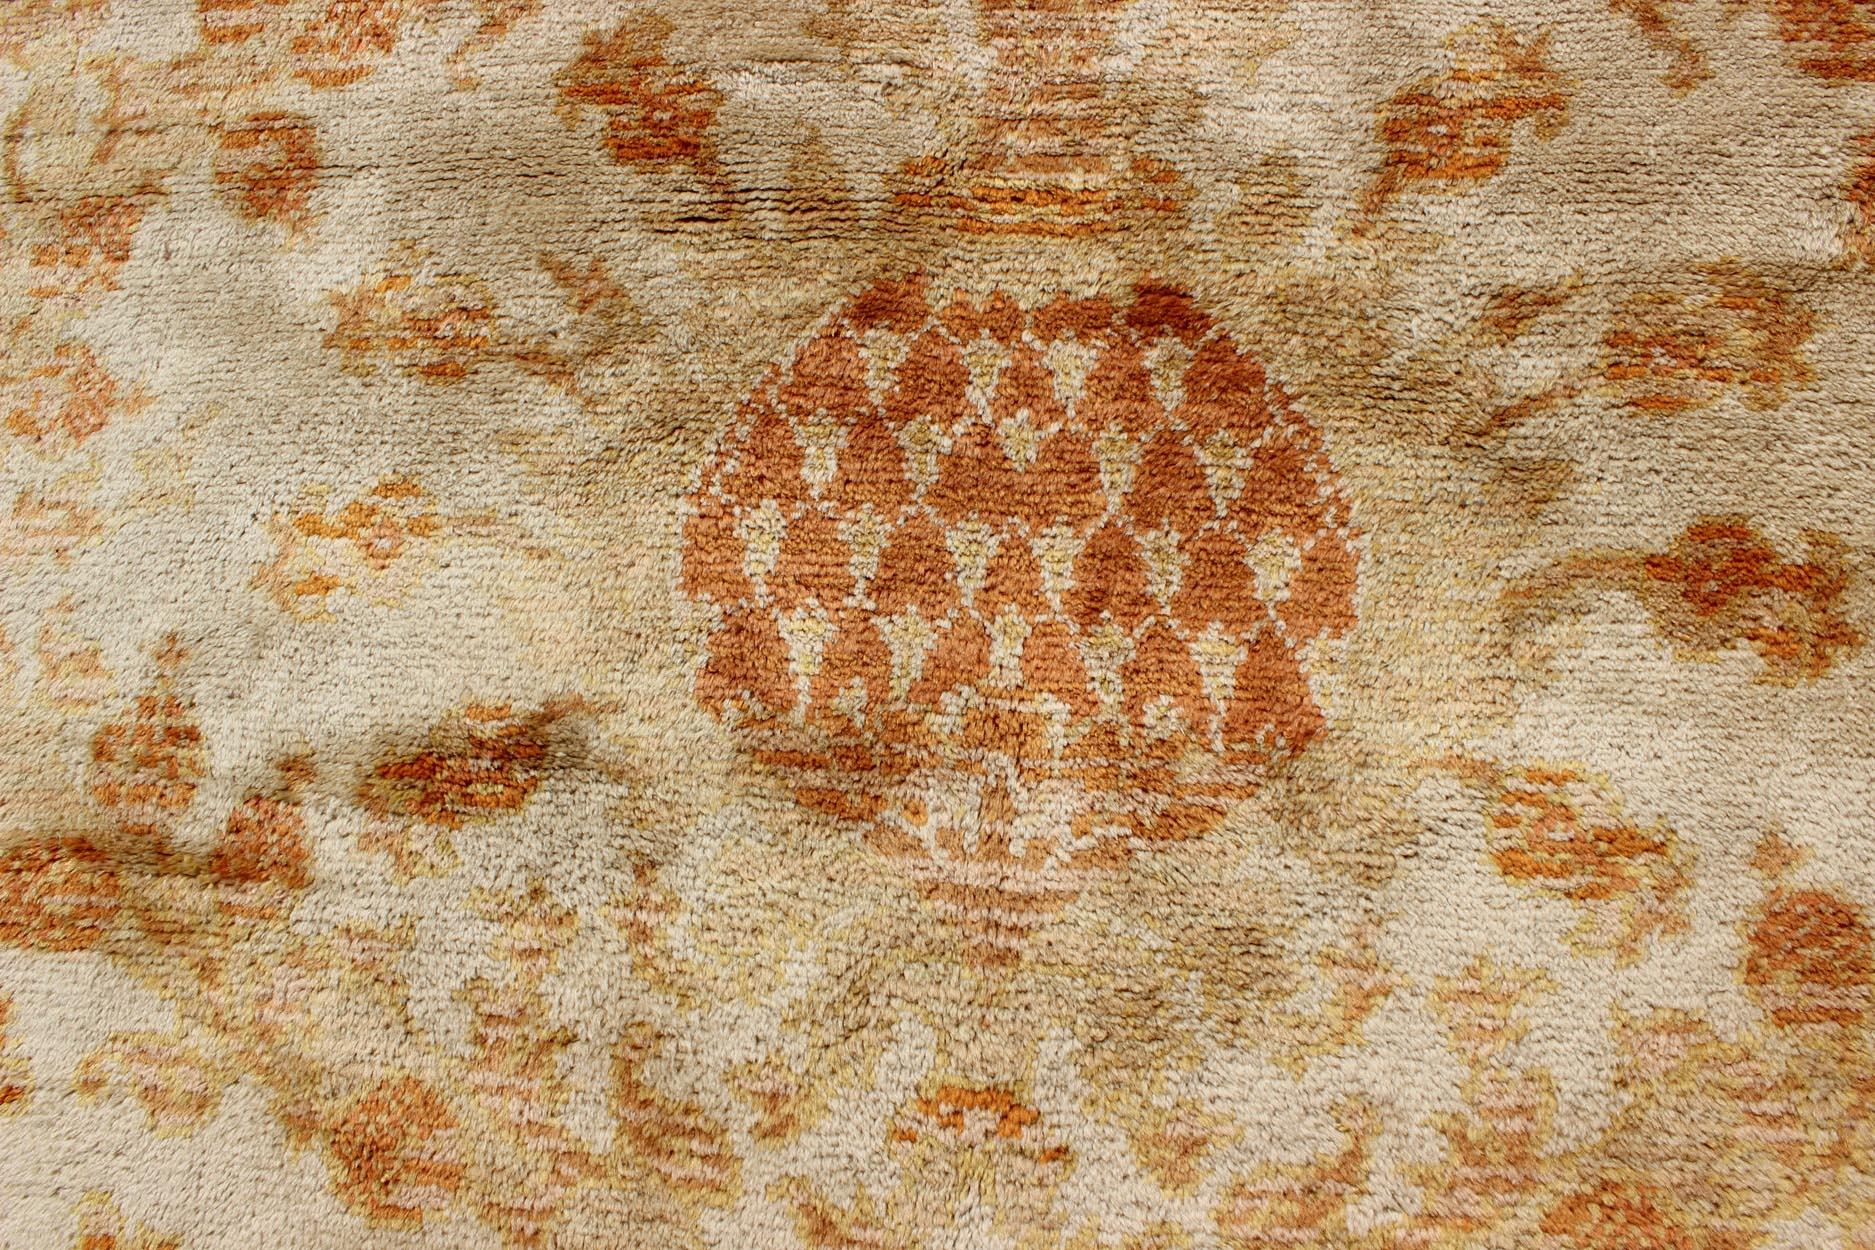 Arts and Crafts Antique Spanish European Carpet with Pineapple Design in Gold, Cream & Tangerine For Sale